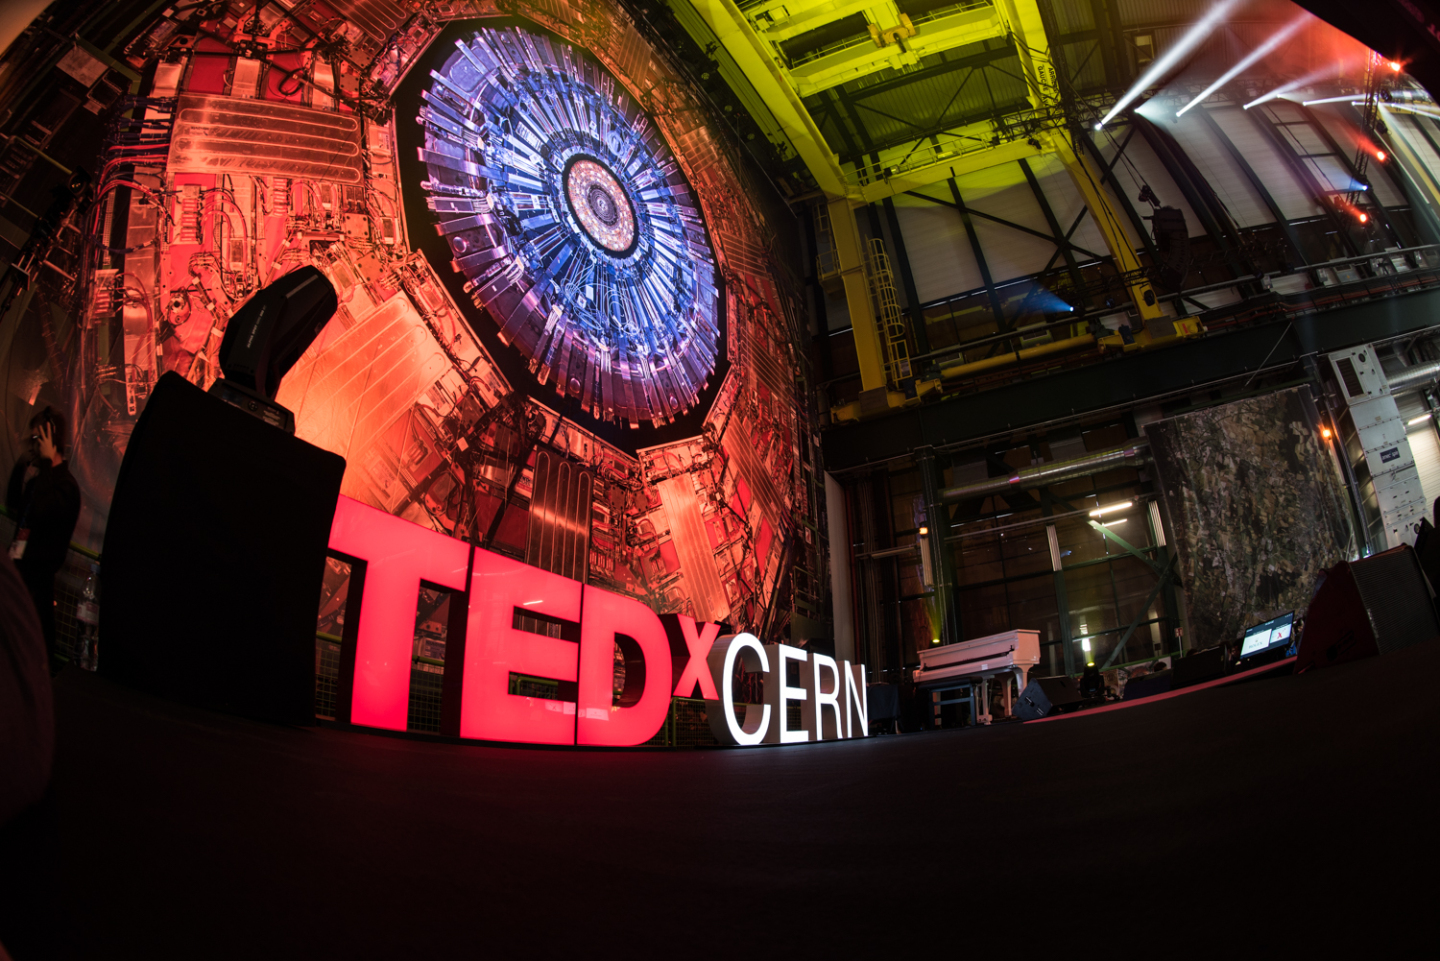 Stage of the TEDxCERN event